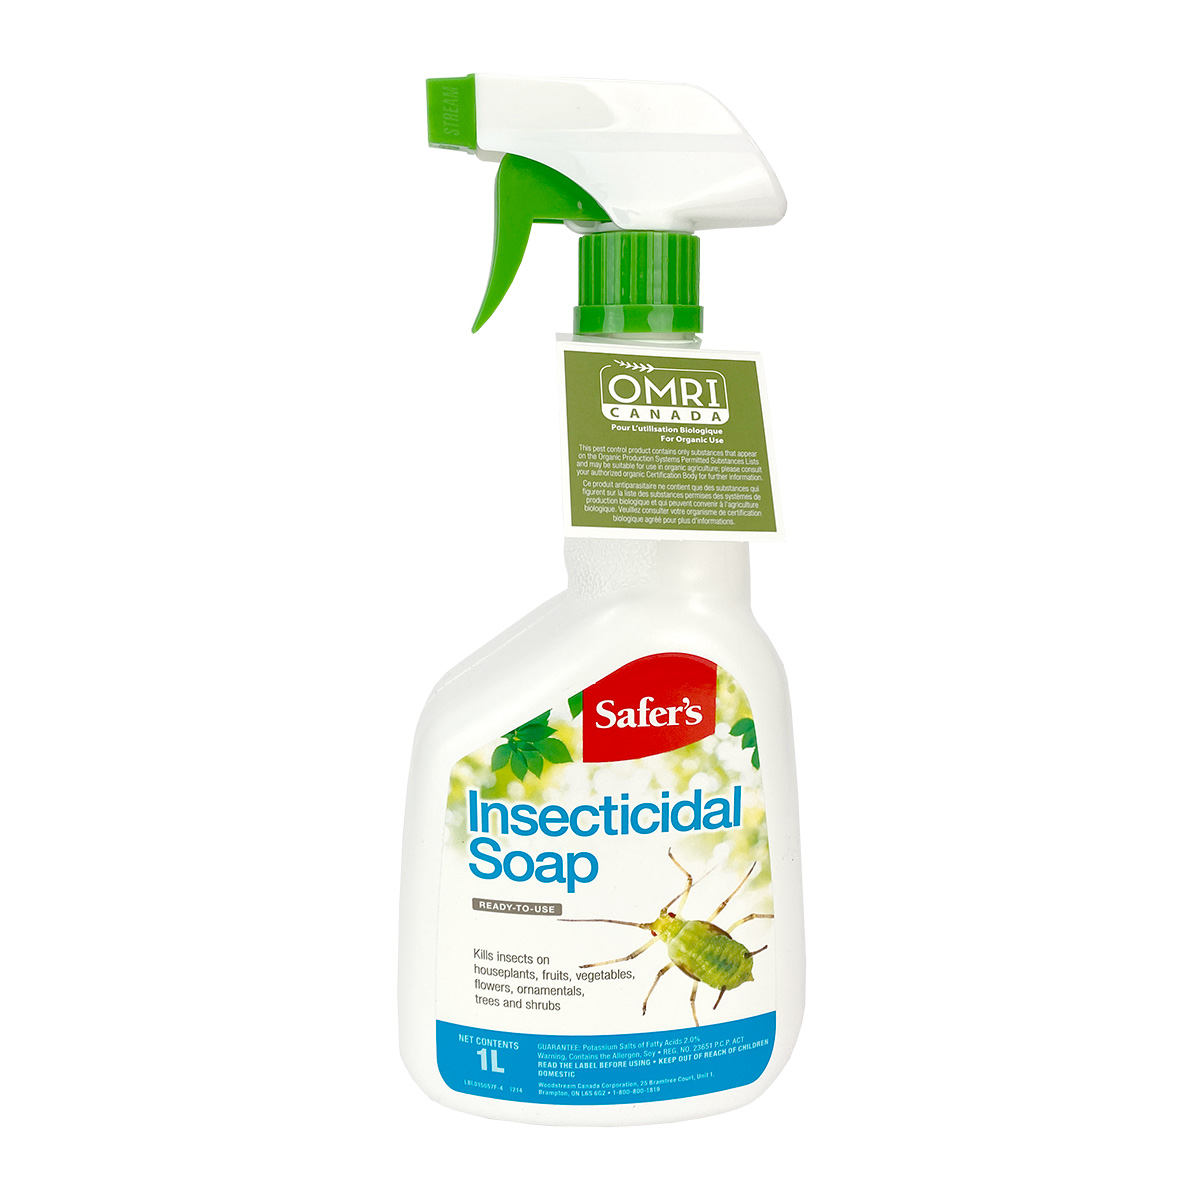 Safers_InsecticidalSoap_1L.jpg